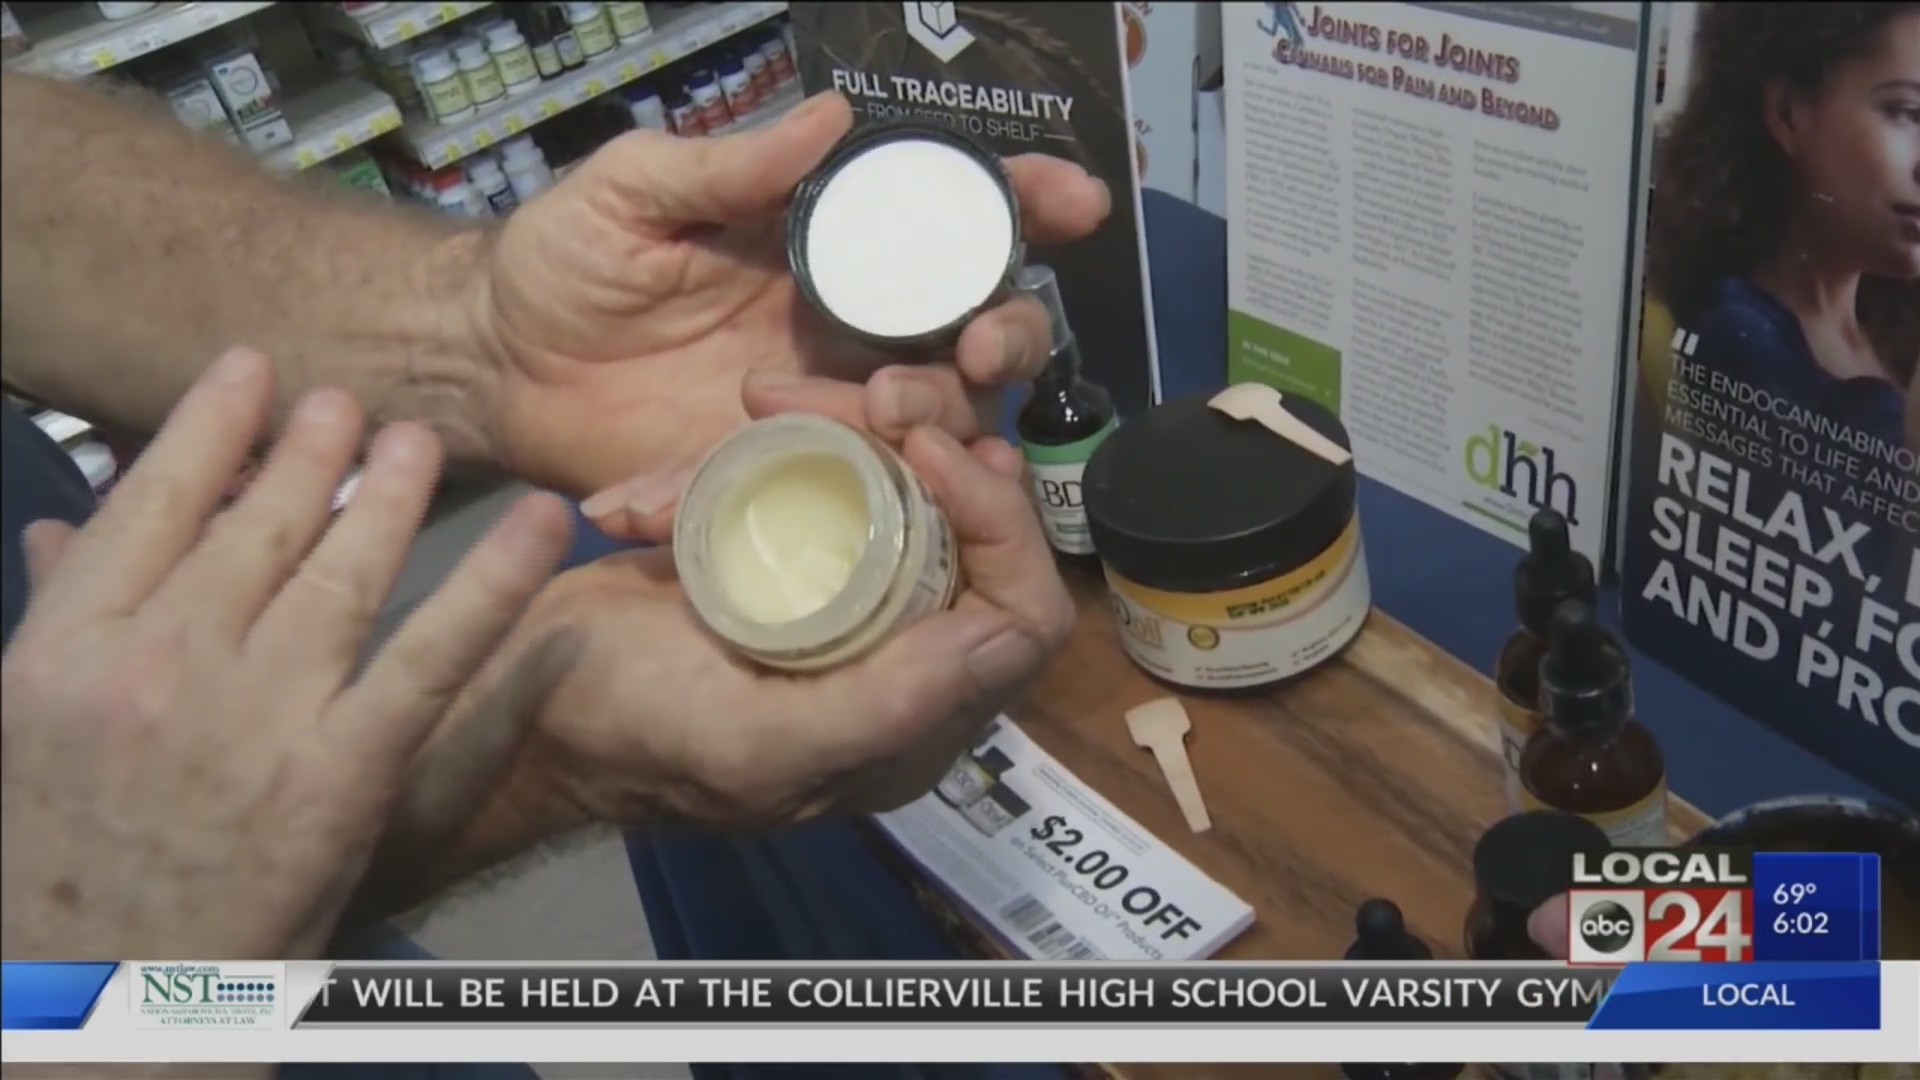 MS Department of Public Safety warning about "dangers of all CBD products" in the state